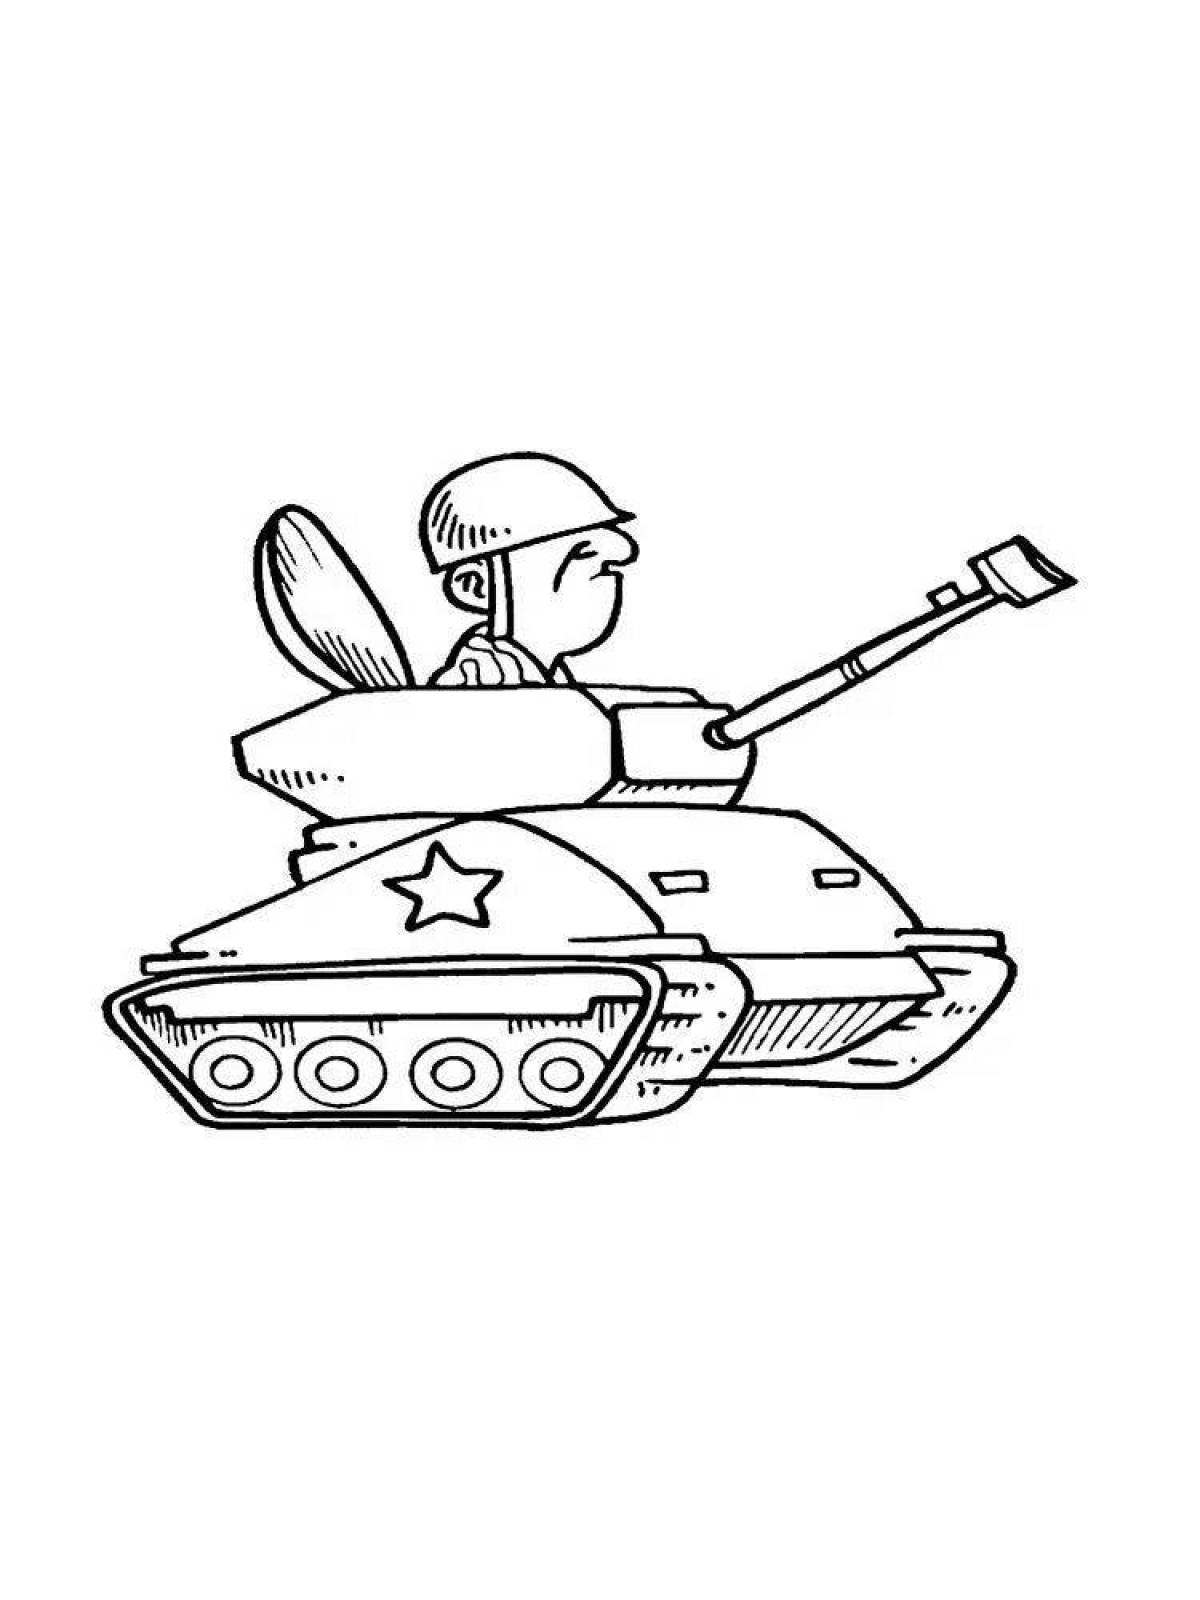 Exciting tanker coloring book for kids